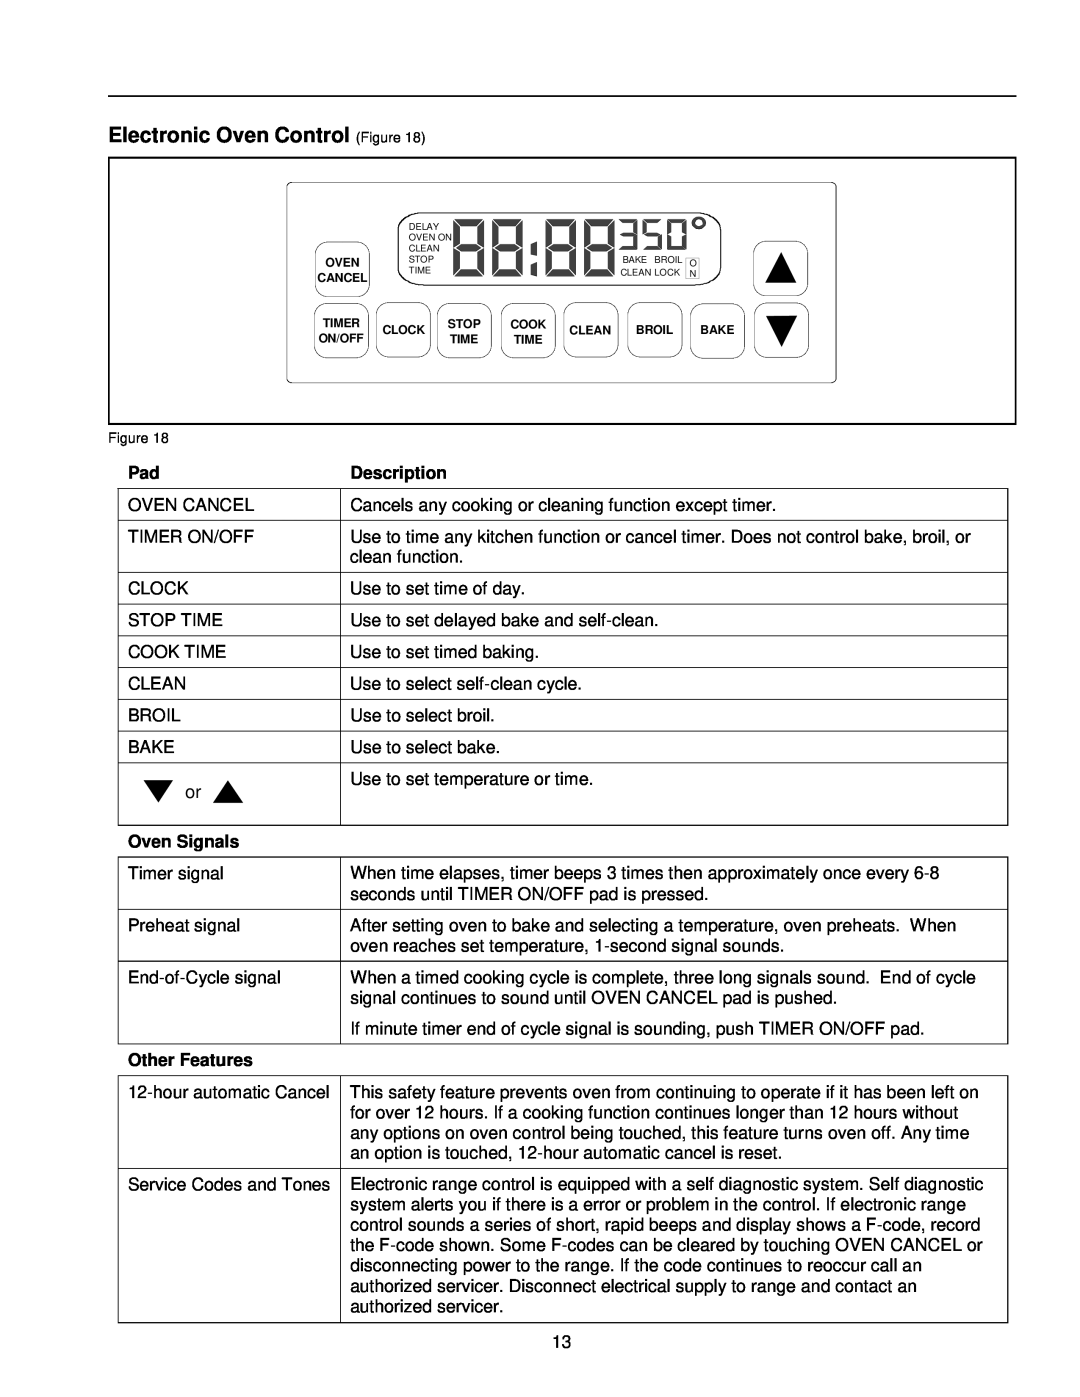 Amana ARR6400/ART6511 owner manual Electronic Oven Control Figure, Description, Oven Signals, Other Features 